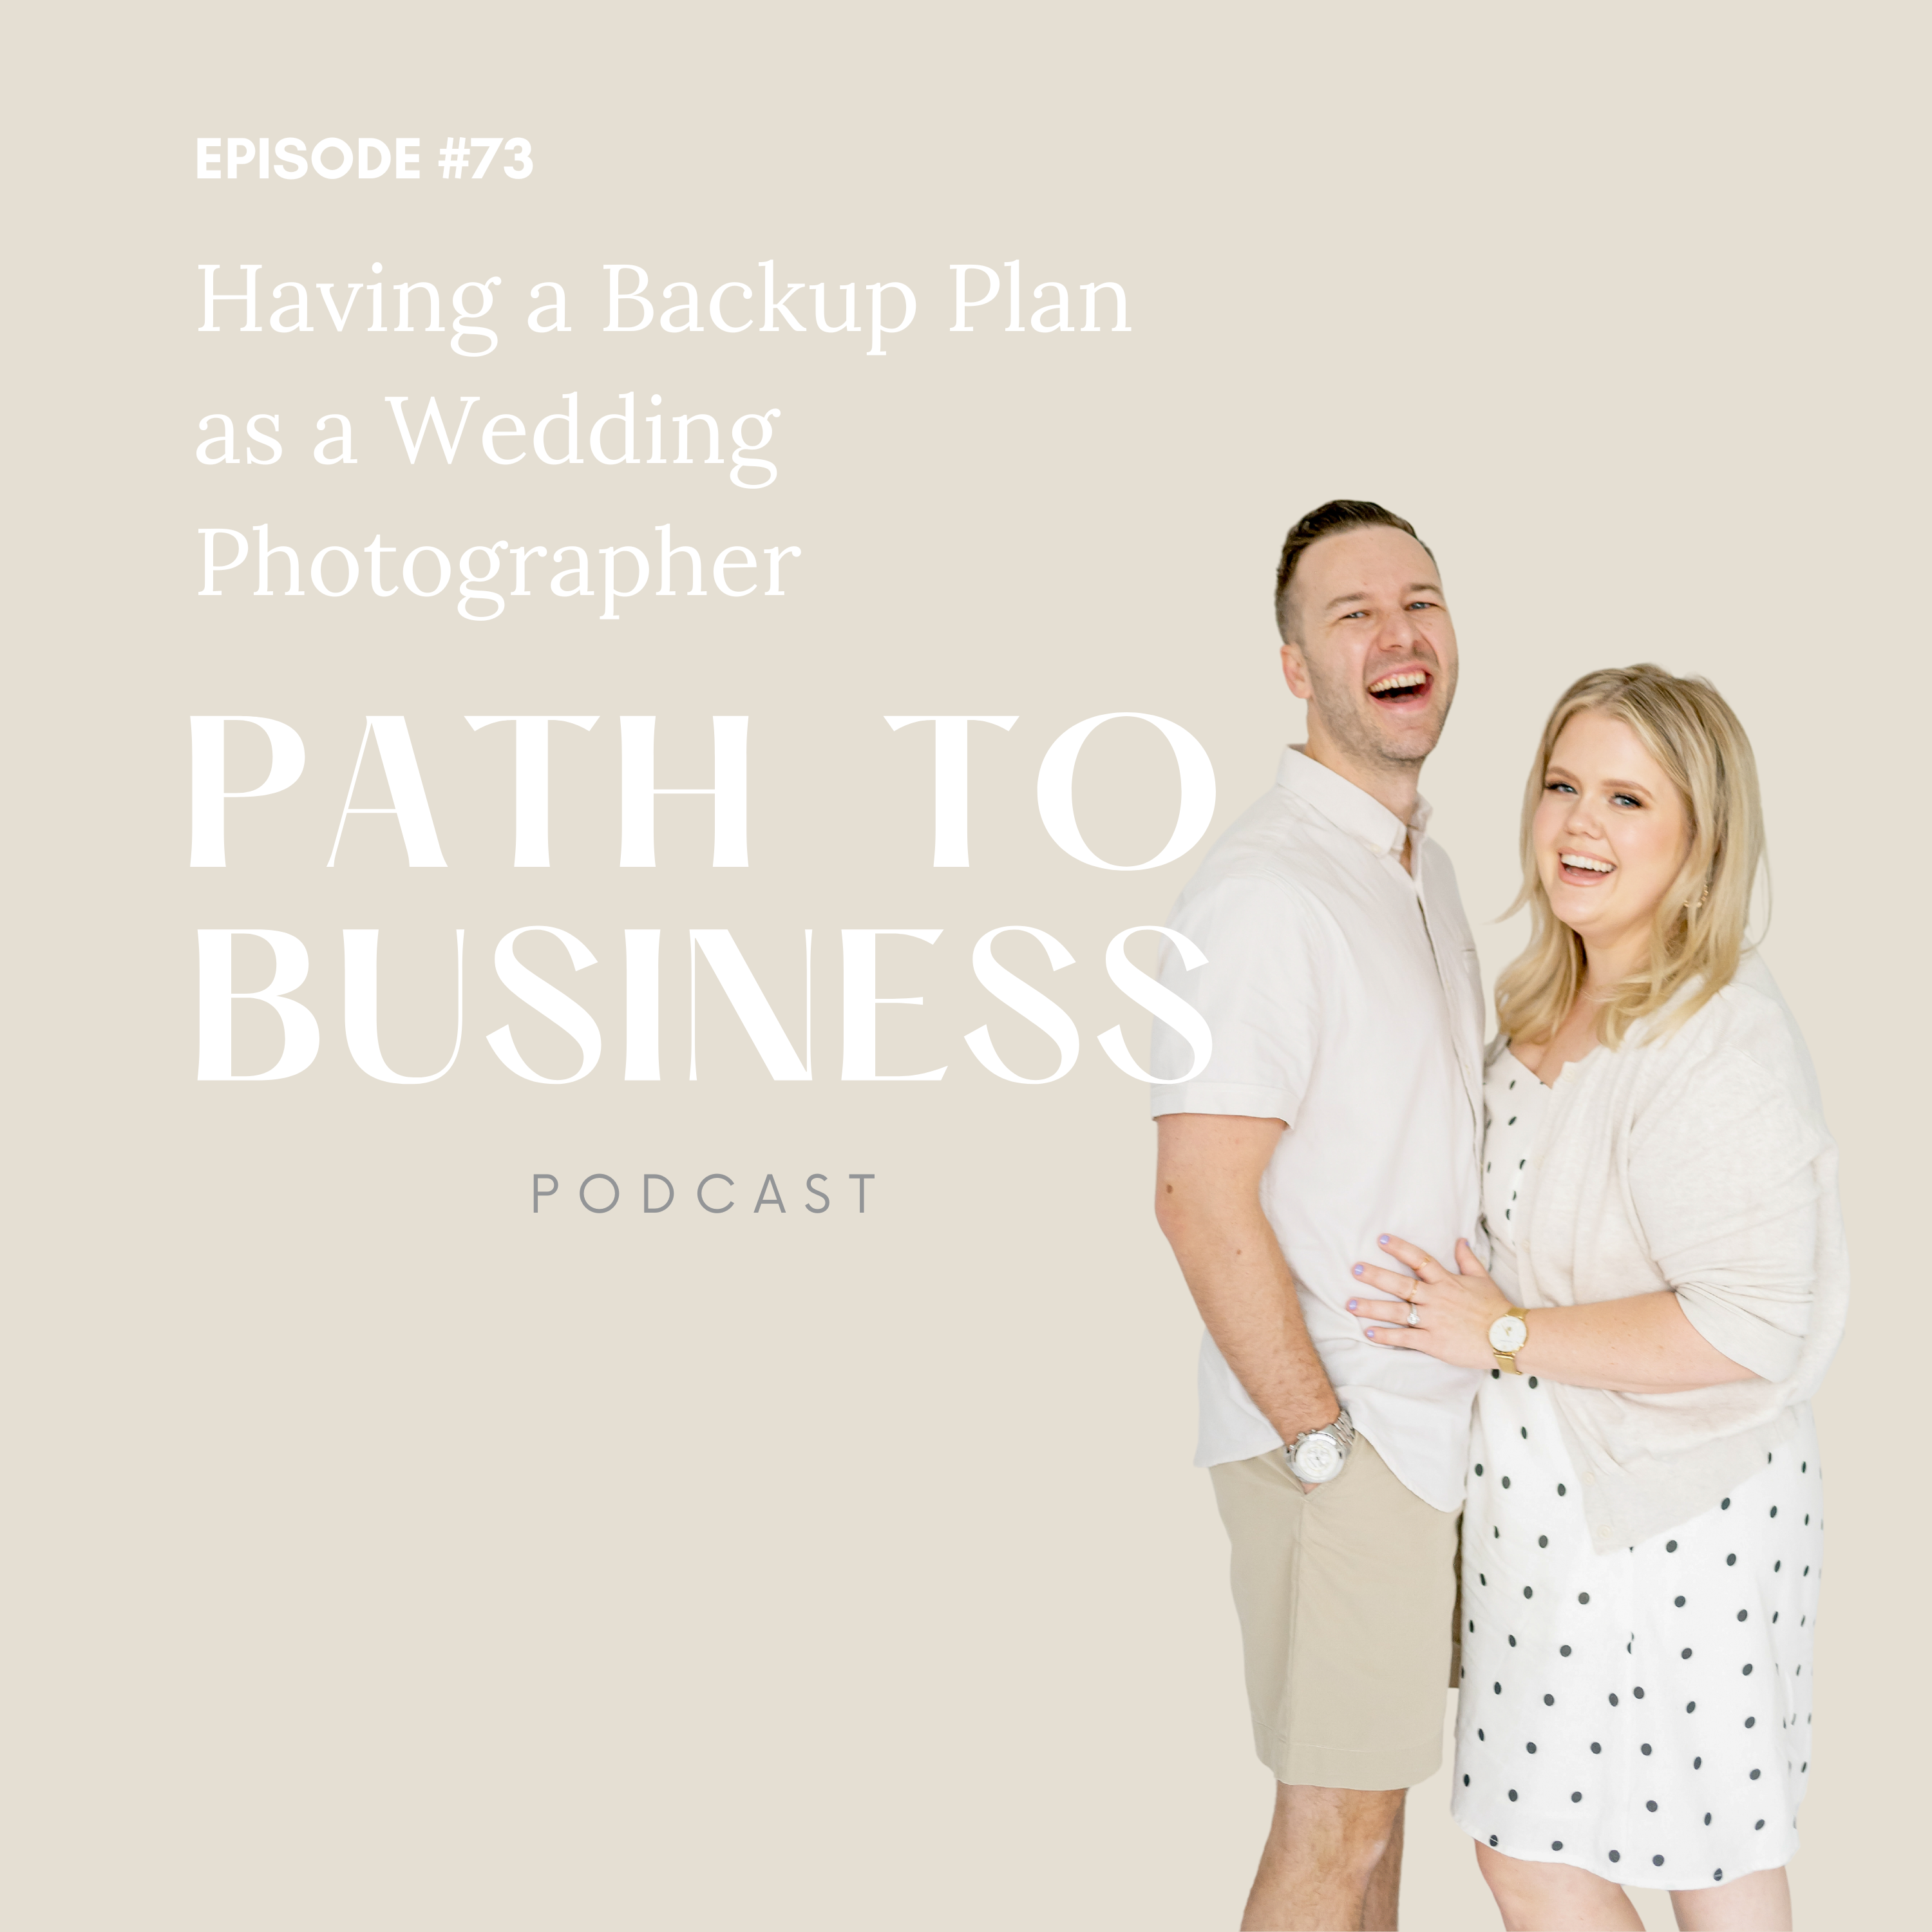 path to business podcast - having a backup plan as a wedding photographer